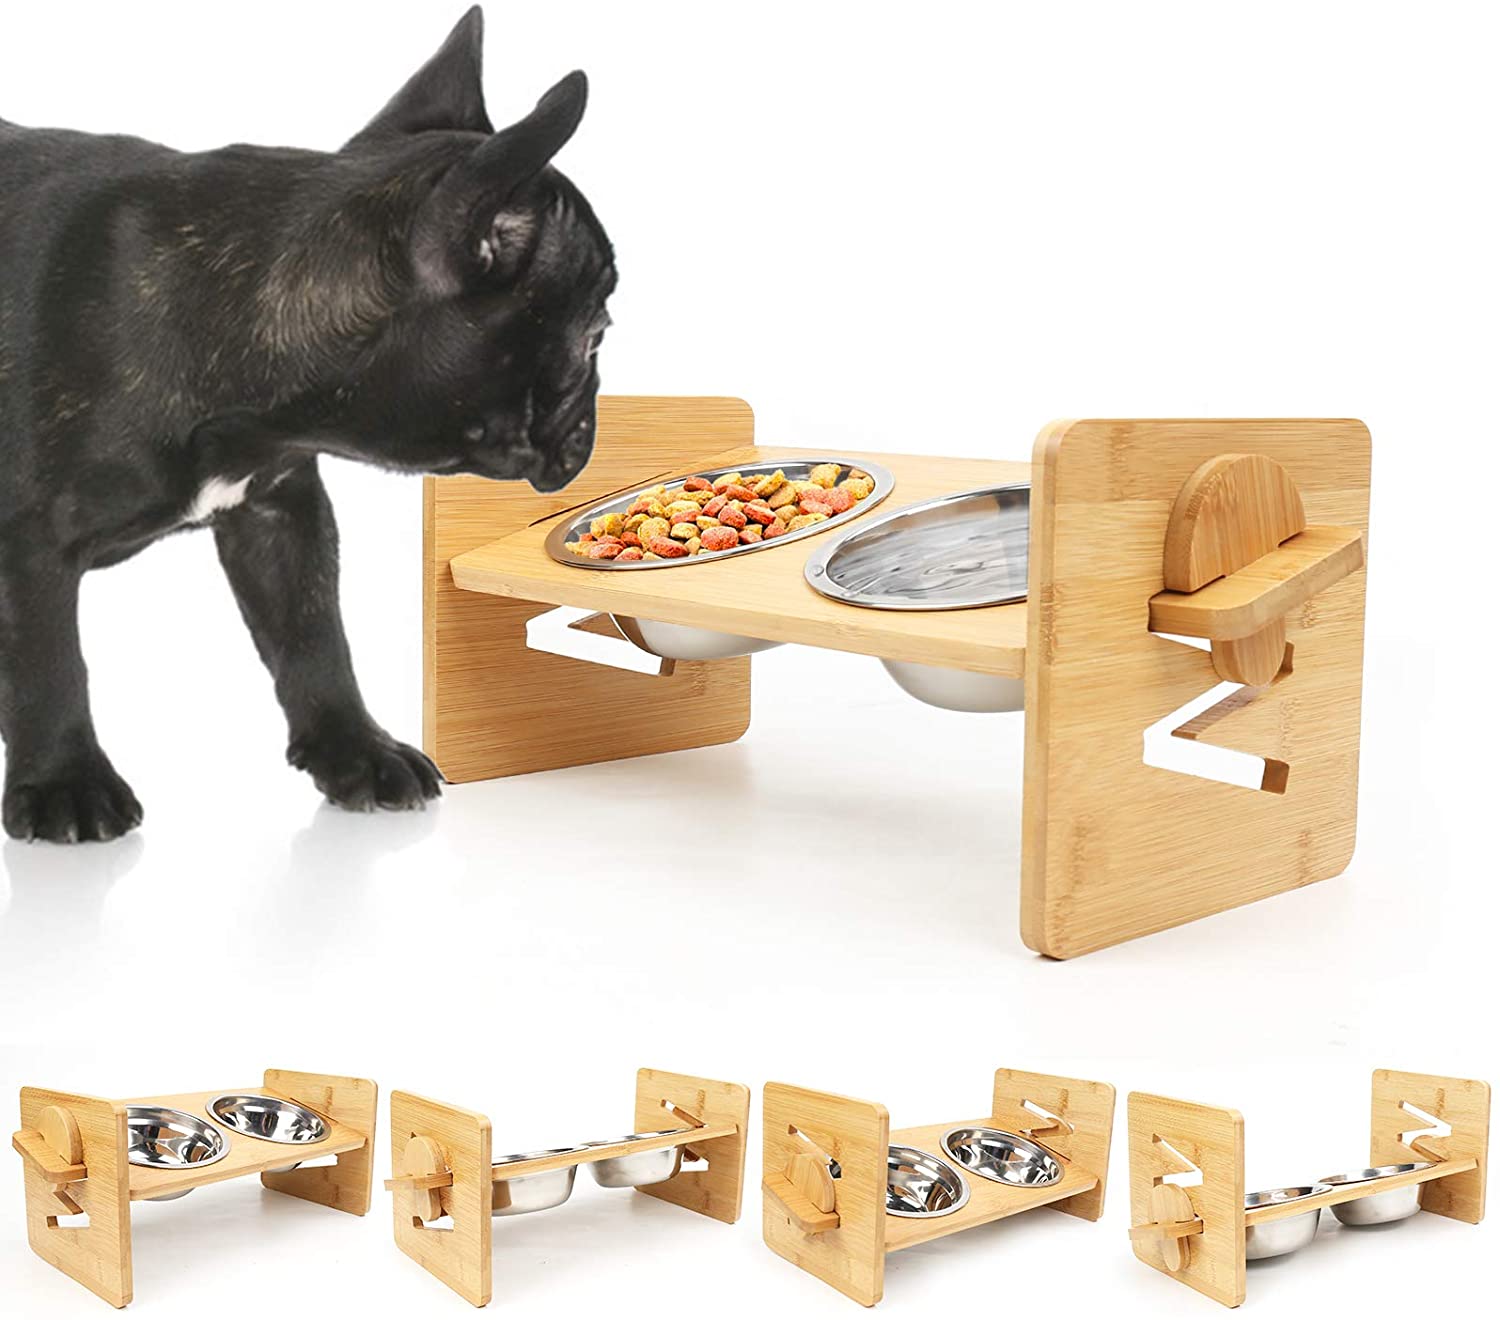 BowlyVate-Elevated-Frenchie-Bowls-Stylish-and-Functional-Pet-Food-and-Water-Feeder-www.frenchie.shop